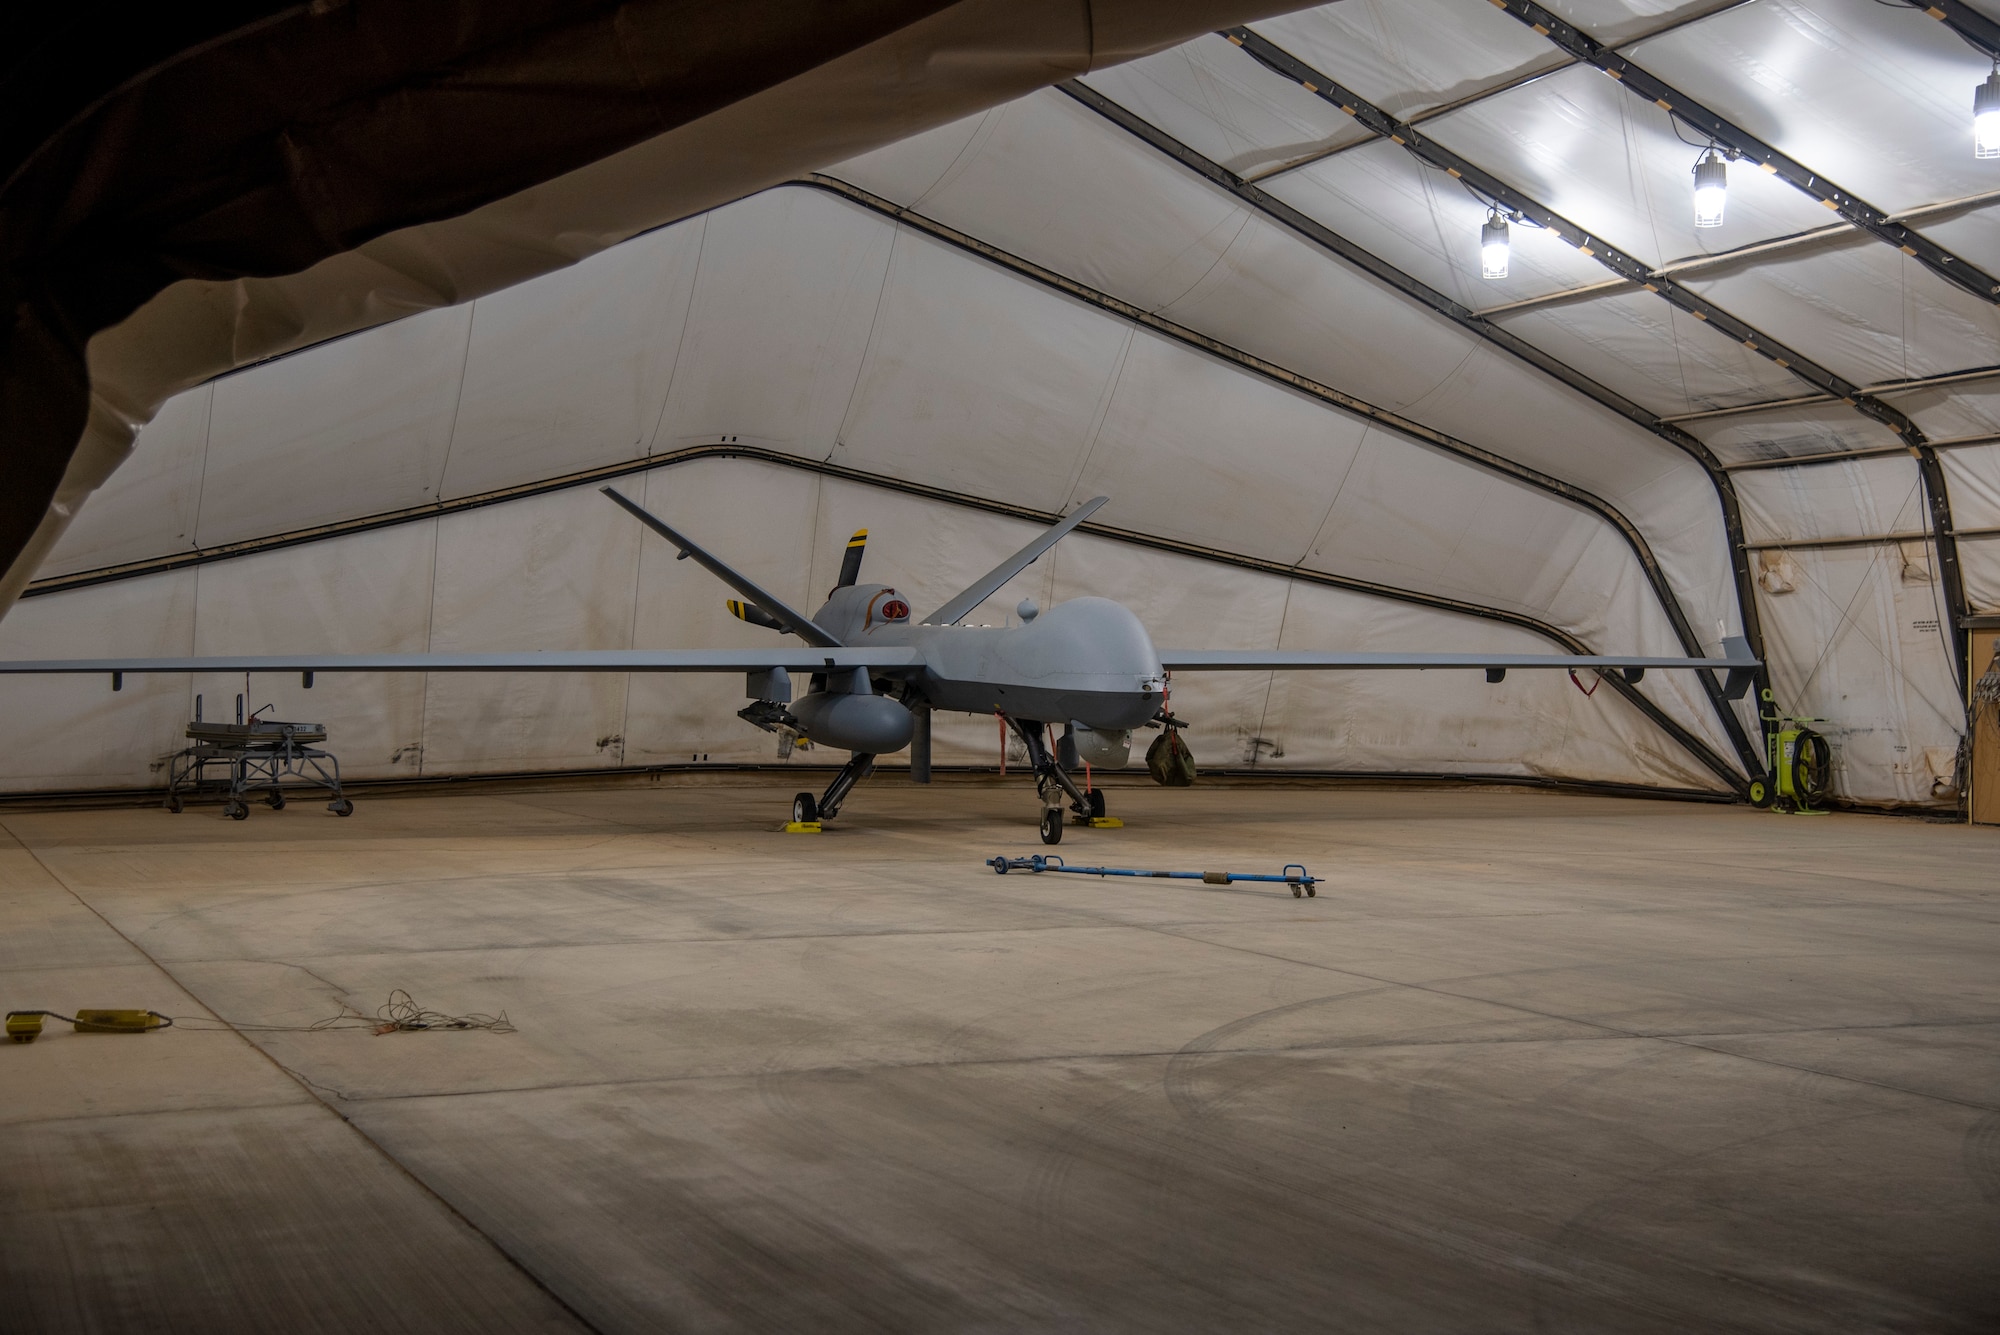 Long exposure photo of an MQ-9 Reaper on the 361 Expeditionary Attack Squadron flight line at an undisclosed location, August 6, 2022. The MQ-9 is an unmanned aircraft capable of remote controlled or autonomous flight. The 361 EAS operates them in support of Operation Inherent Resolve. (U.S. Air Force photo by: Tech. Sgt. Jim Bentley)